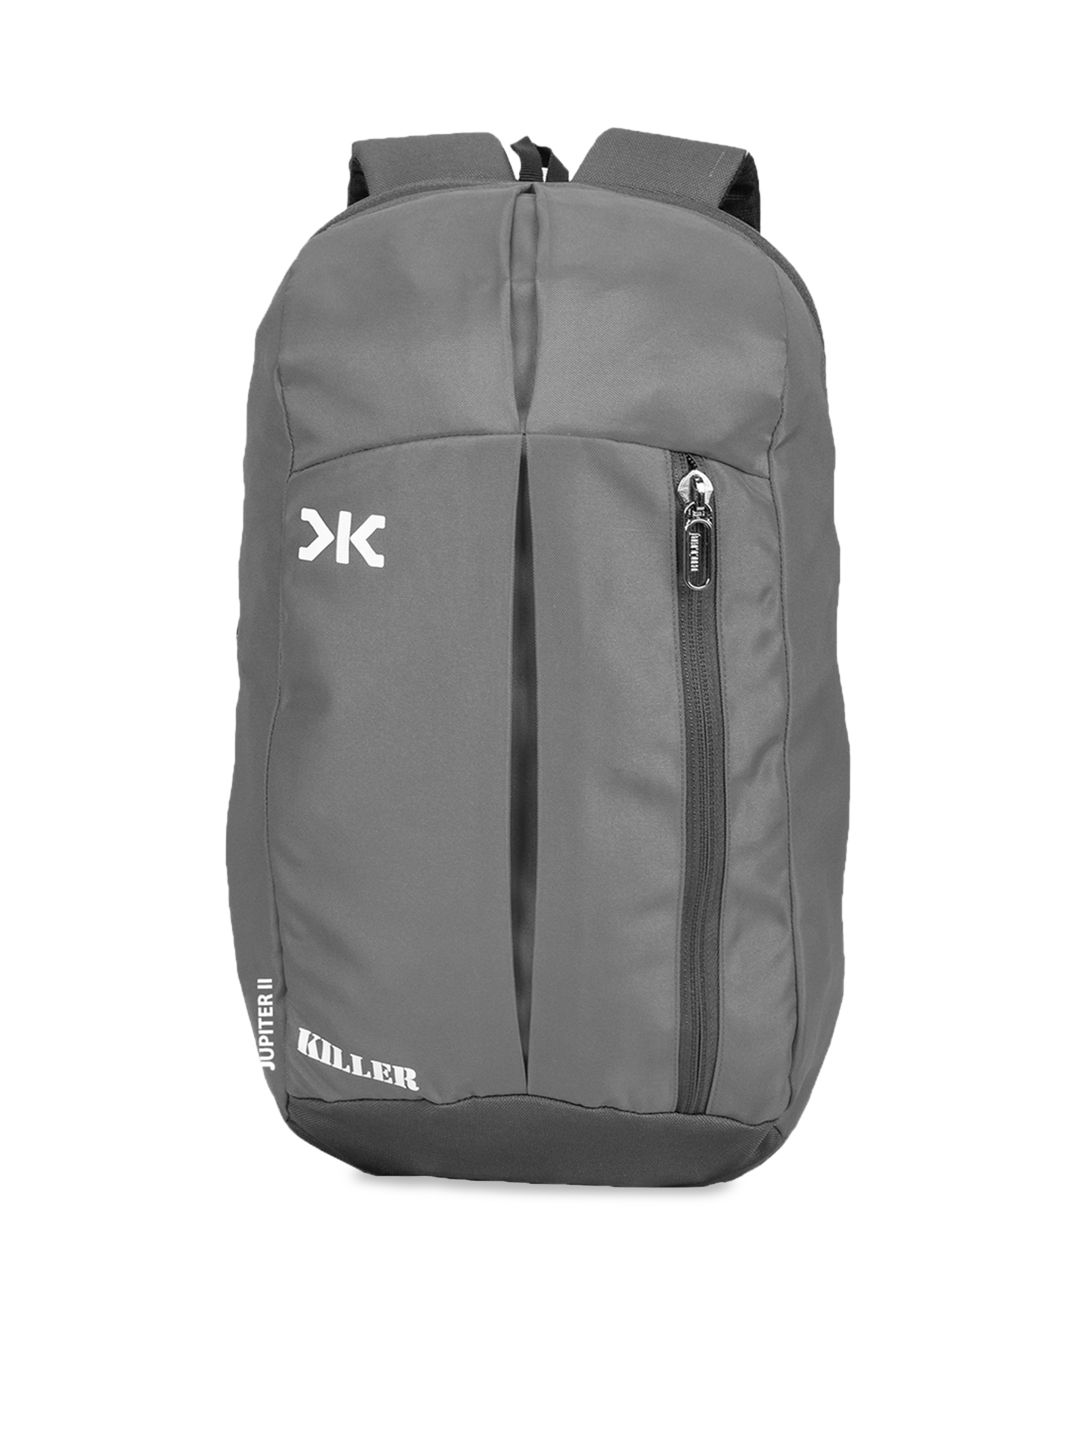 Killer Unisex Grey Solid Backpack Price in India